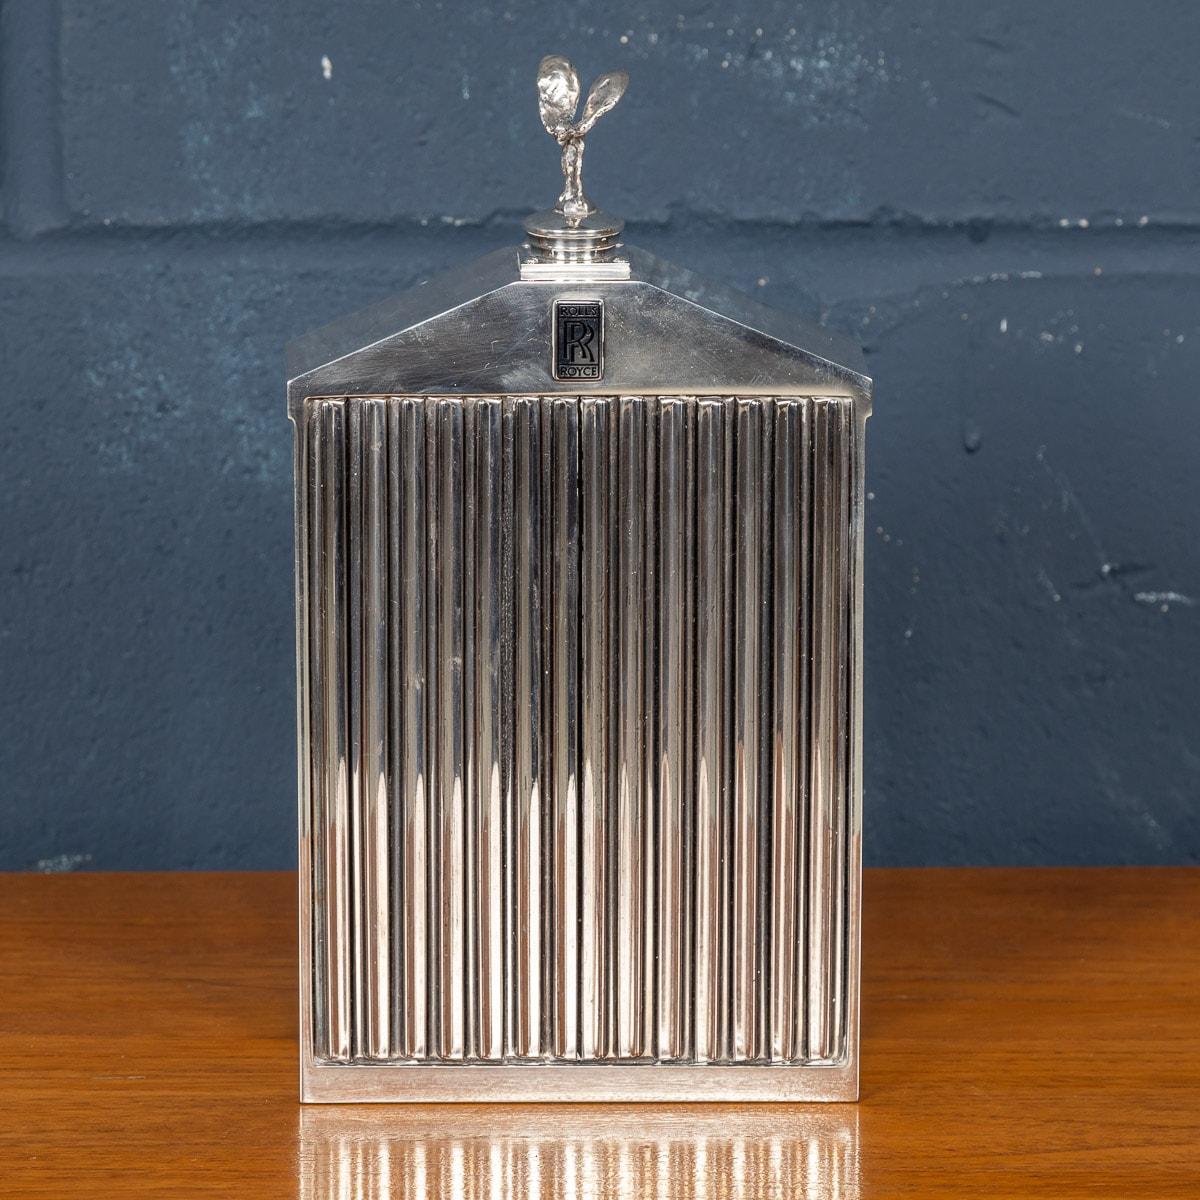 A vintage Rolls Royce chrome radiator grille decanter made by Classic Stable Ltd of Worthing with the classic radiator grille, bearing the Spirit of Ecstacy finial to the top. Made in the 1970s, the finish is of a very high quality, heavily chromed